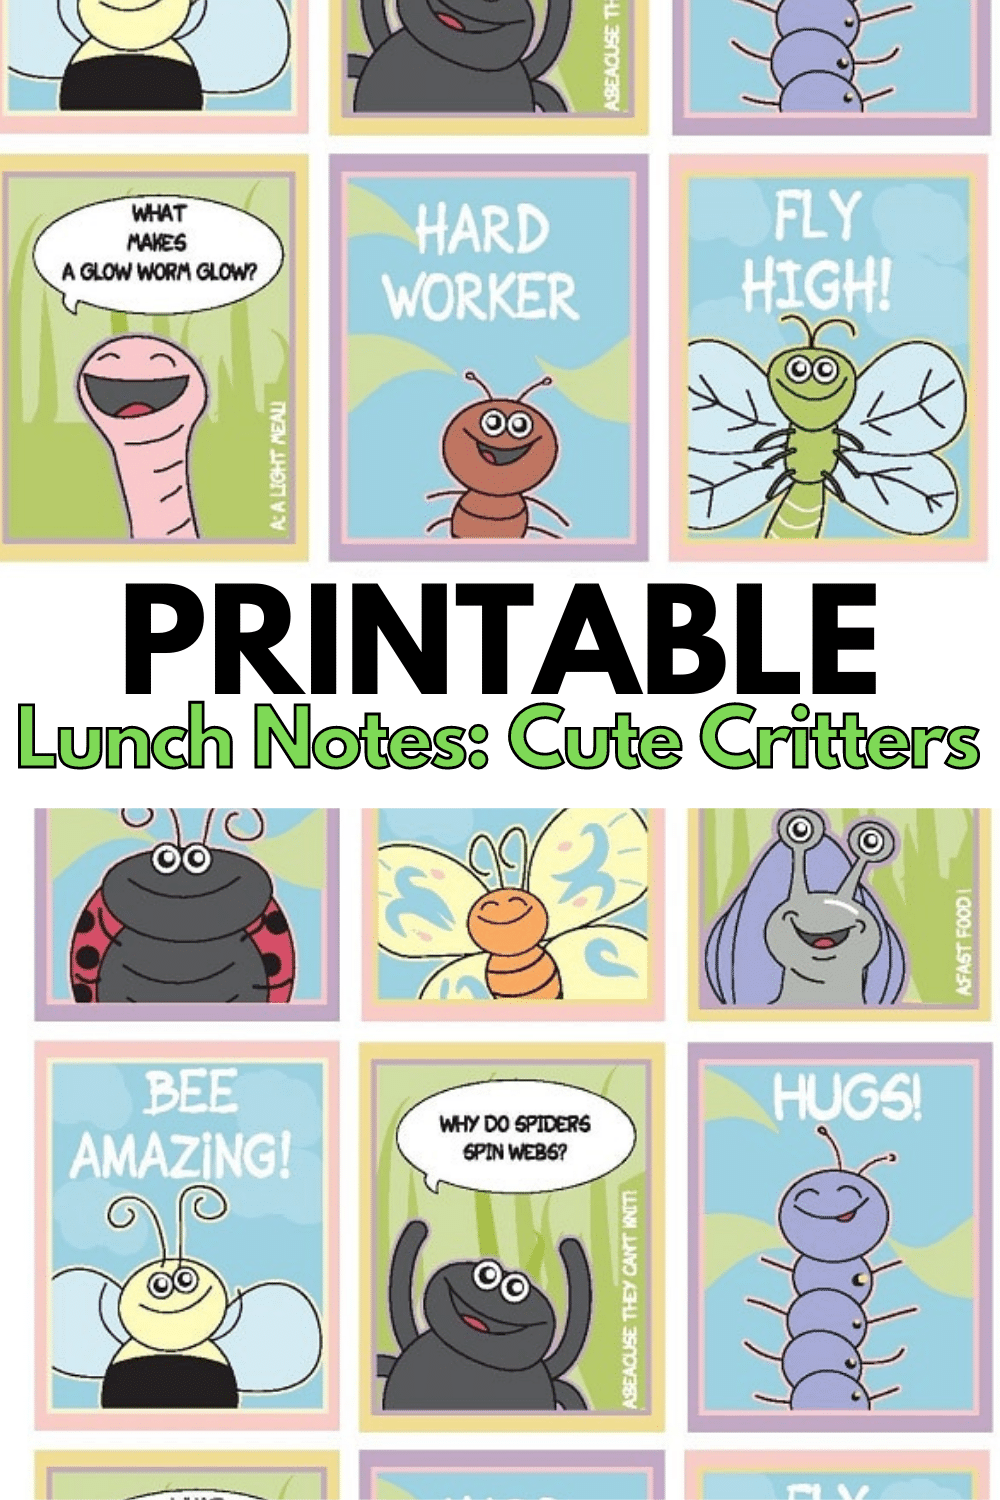 These printable lunch notes are super cute and an easy way to brighten your child's day! #printables #lunchnotes #parenting via @wondermomwannab